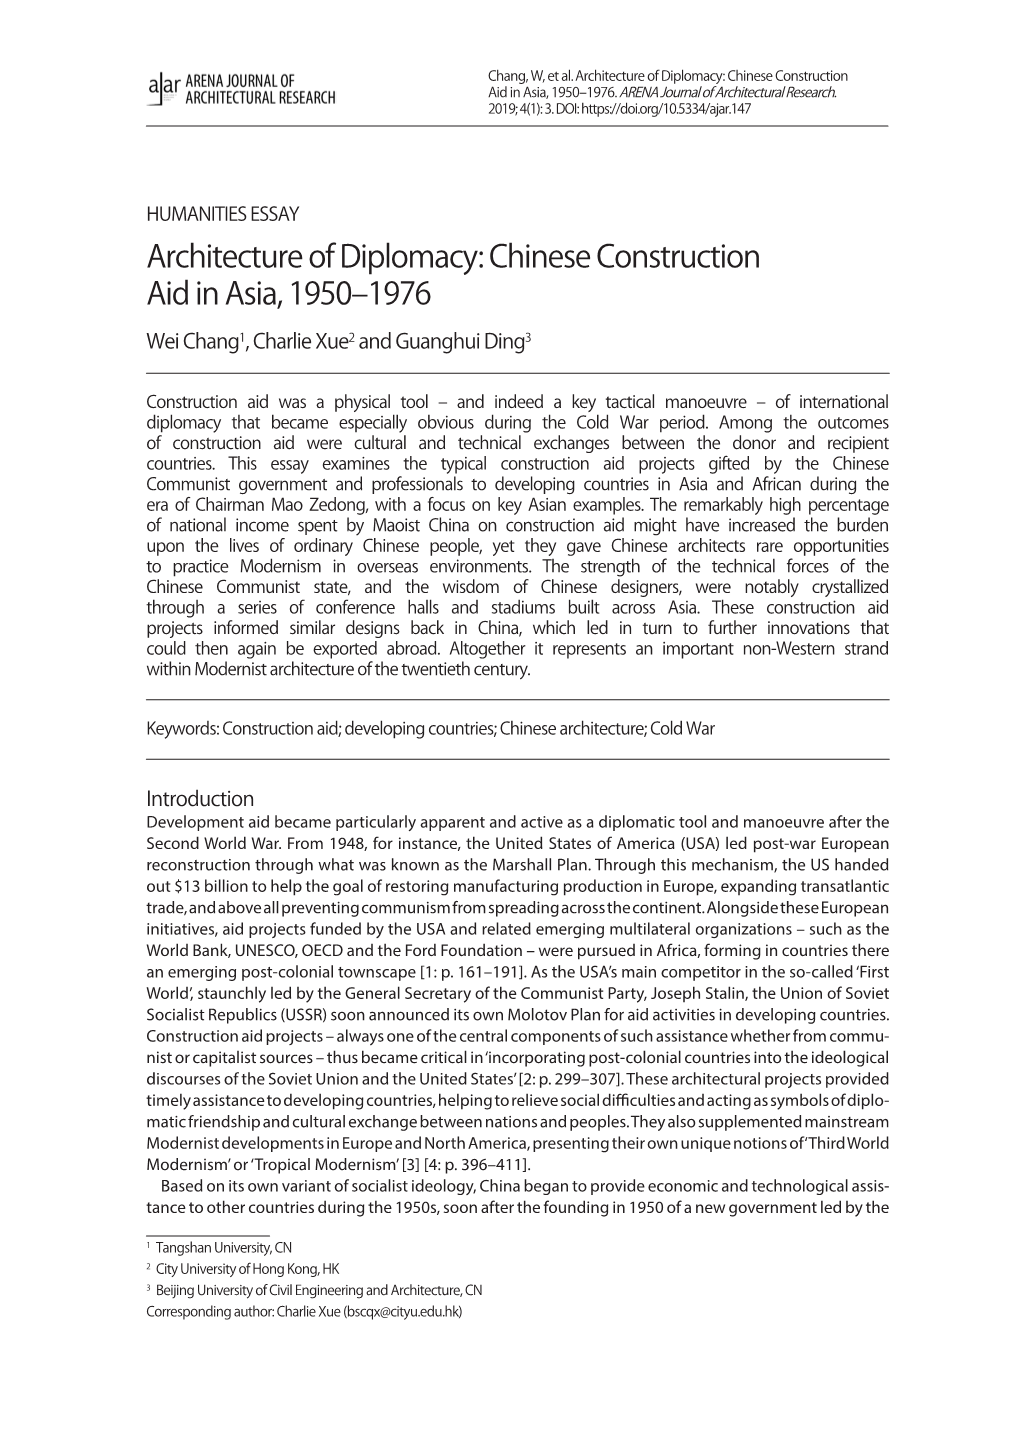 Architecture of Diplomacy: Chinese Construction Aid in Asia, 1950–1976